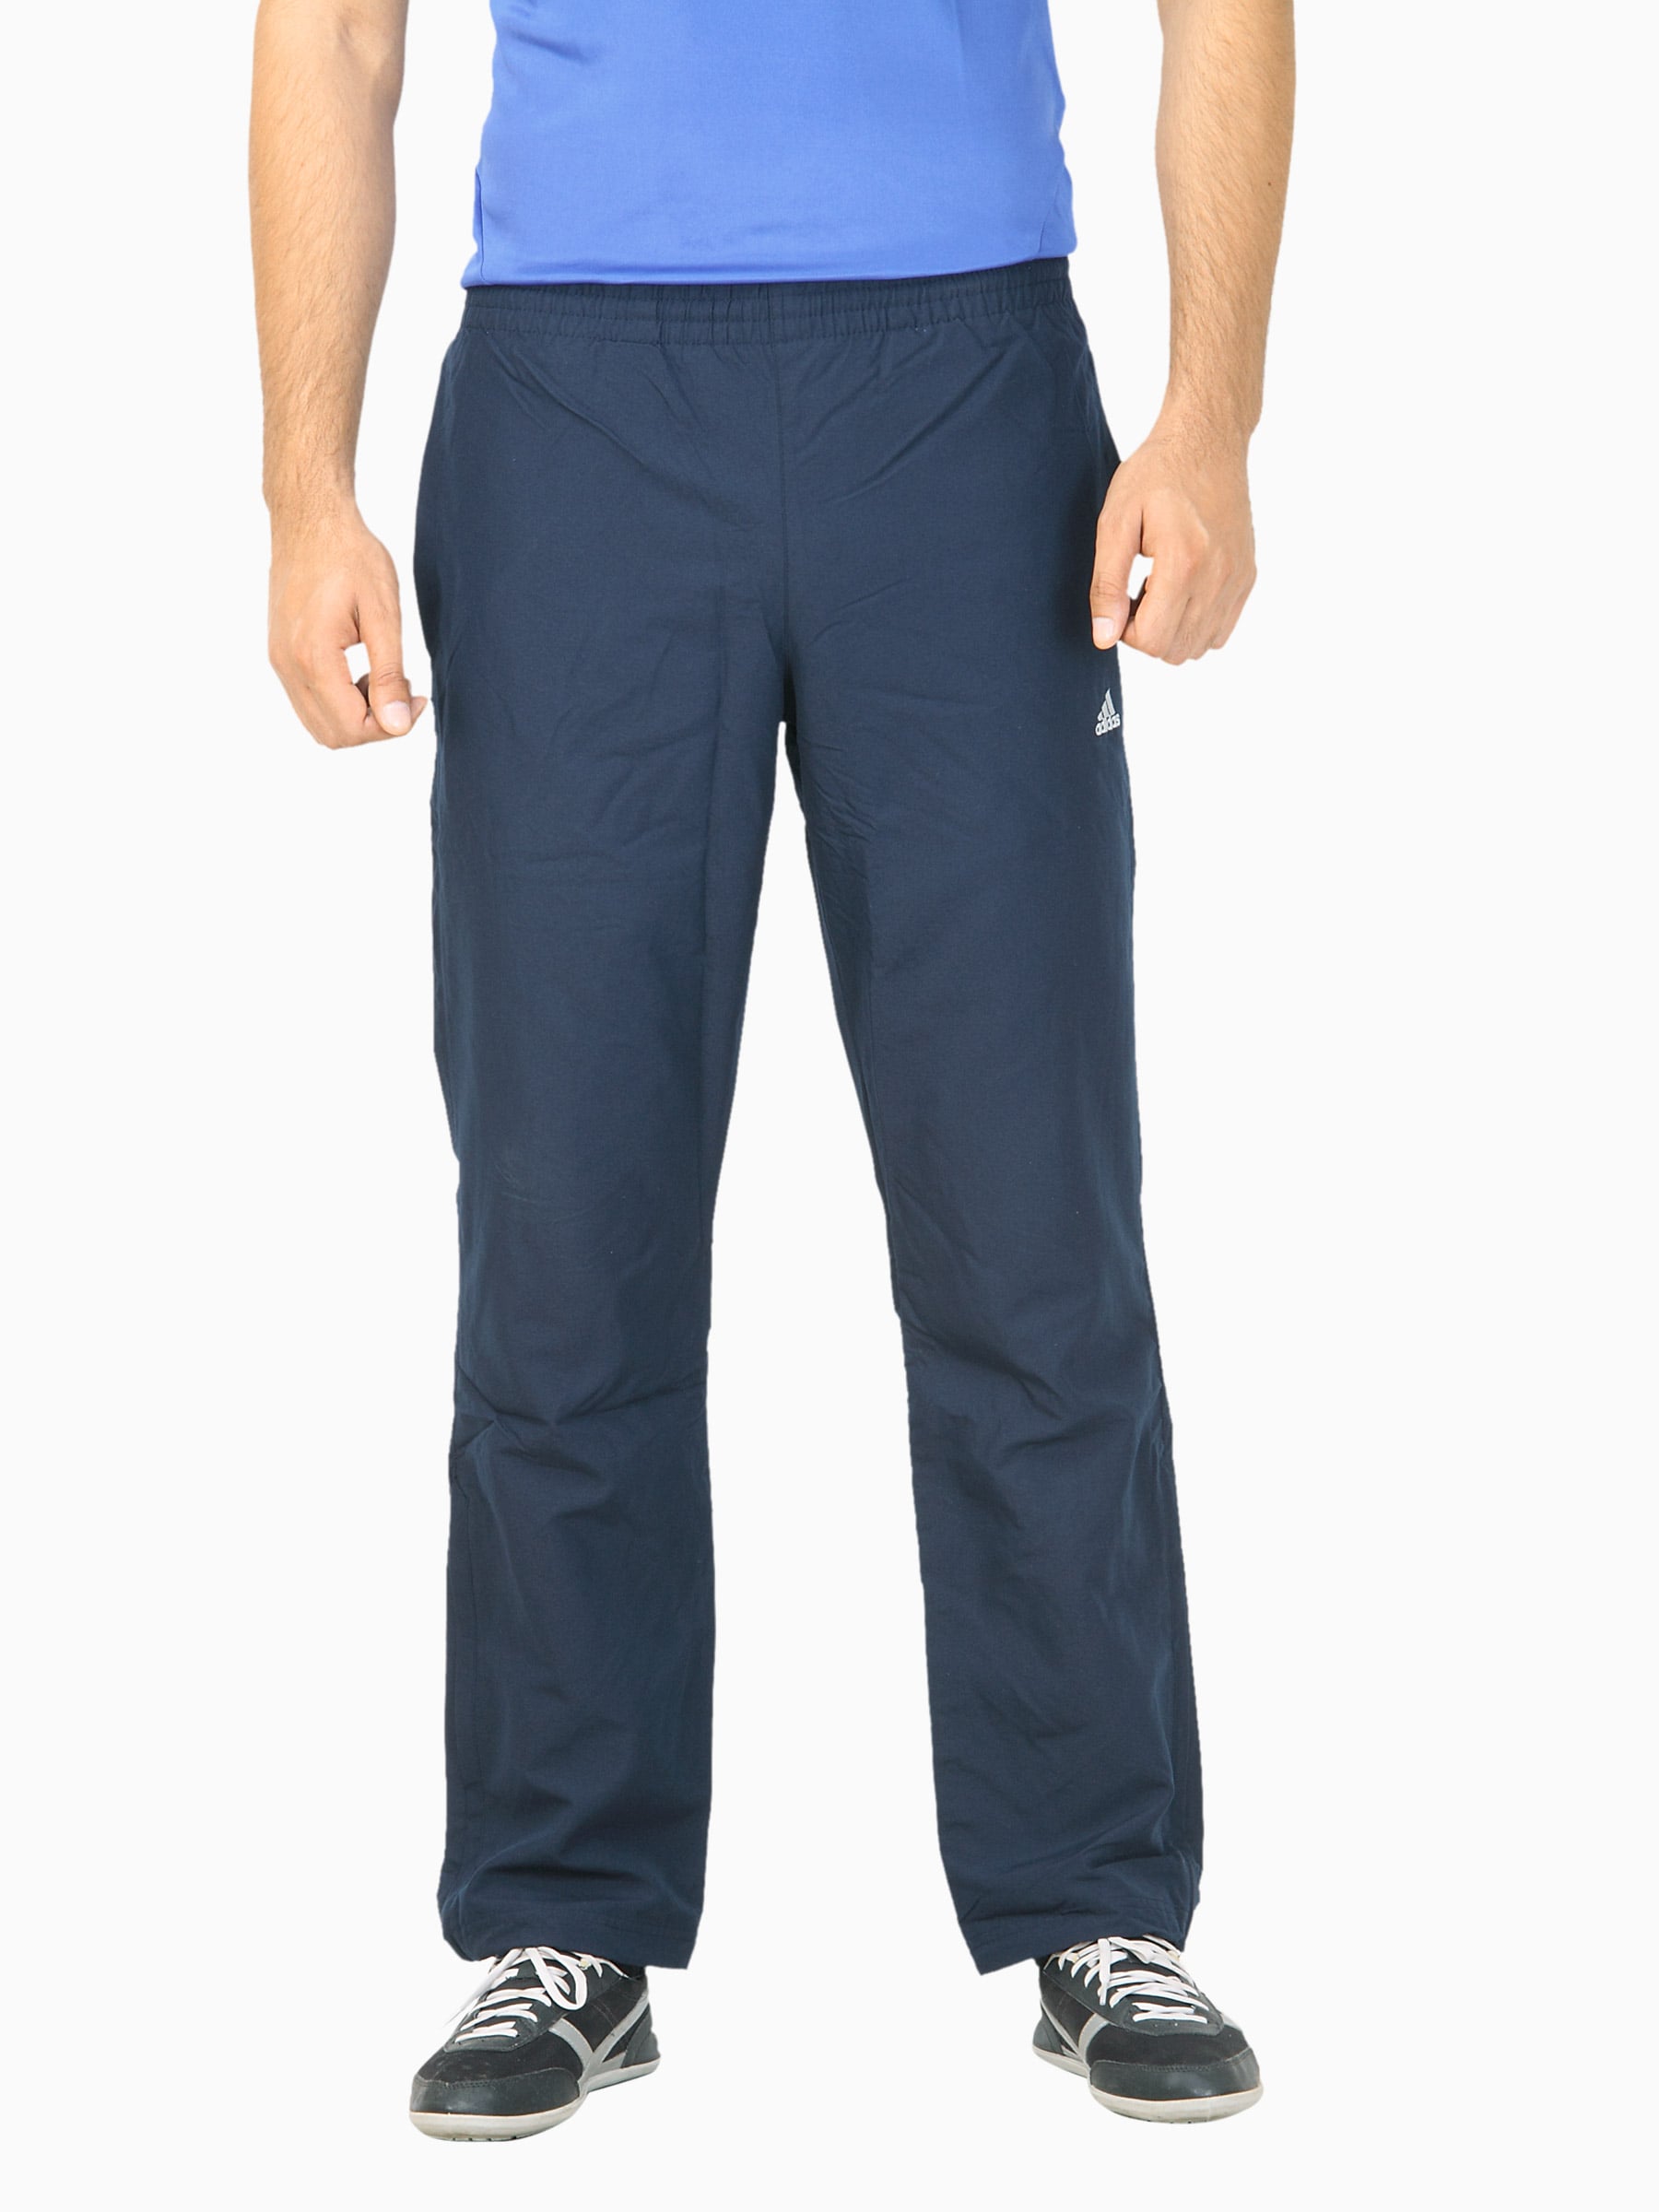 ADIDAS Men Solid Navy Blue Track Pant